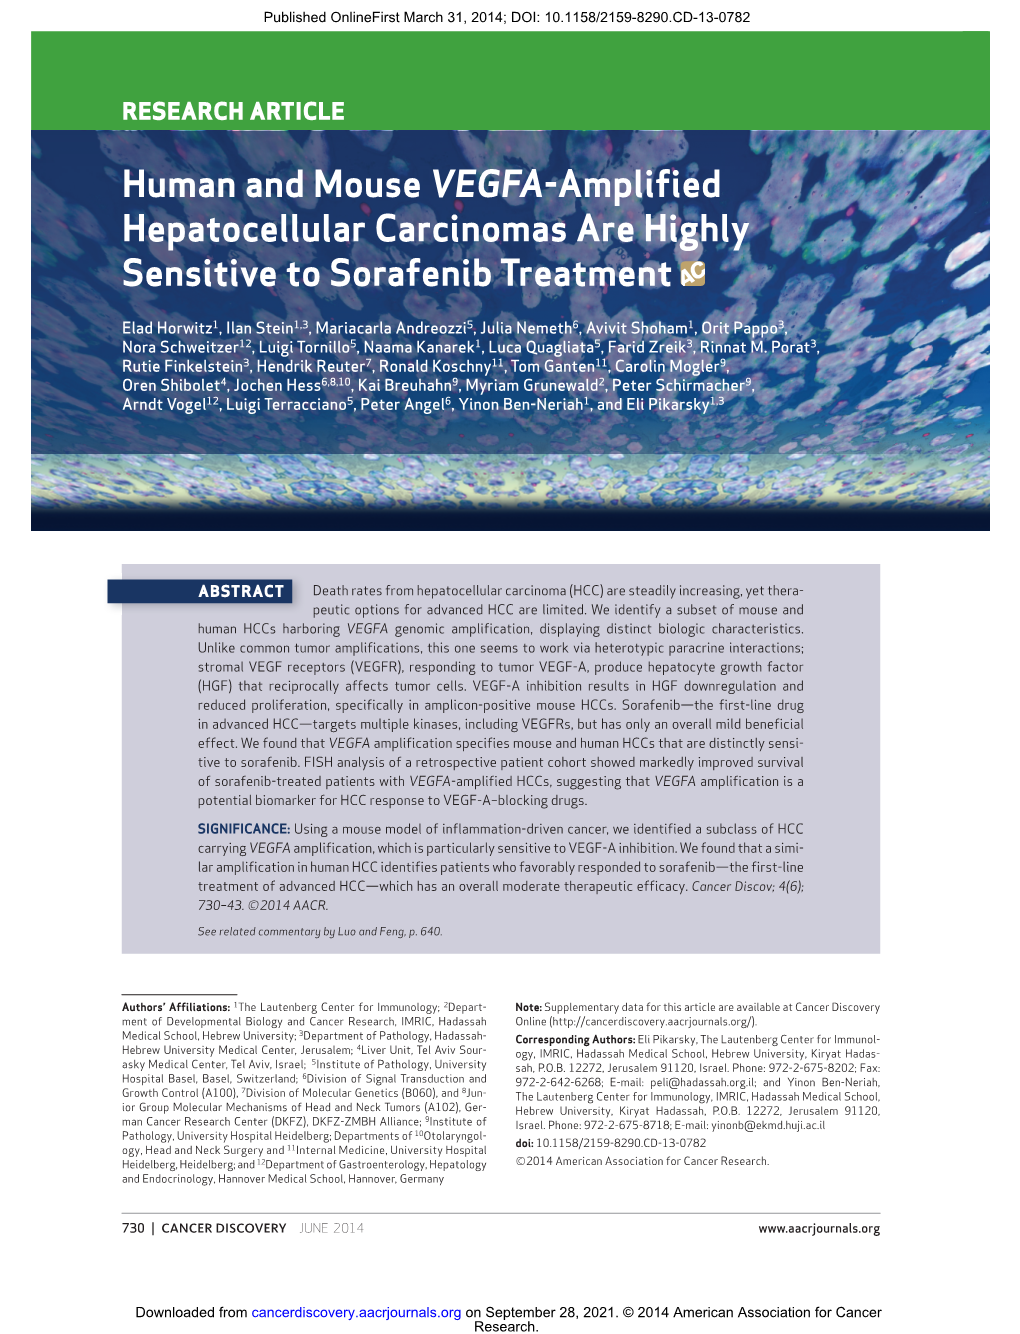 Human and Mouse VEGFA -Amplified Hepatocellular Carcinomas Are Highly Sensitive to Sorafenib Treatment